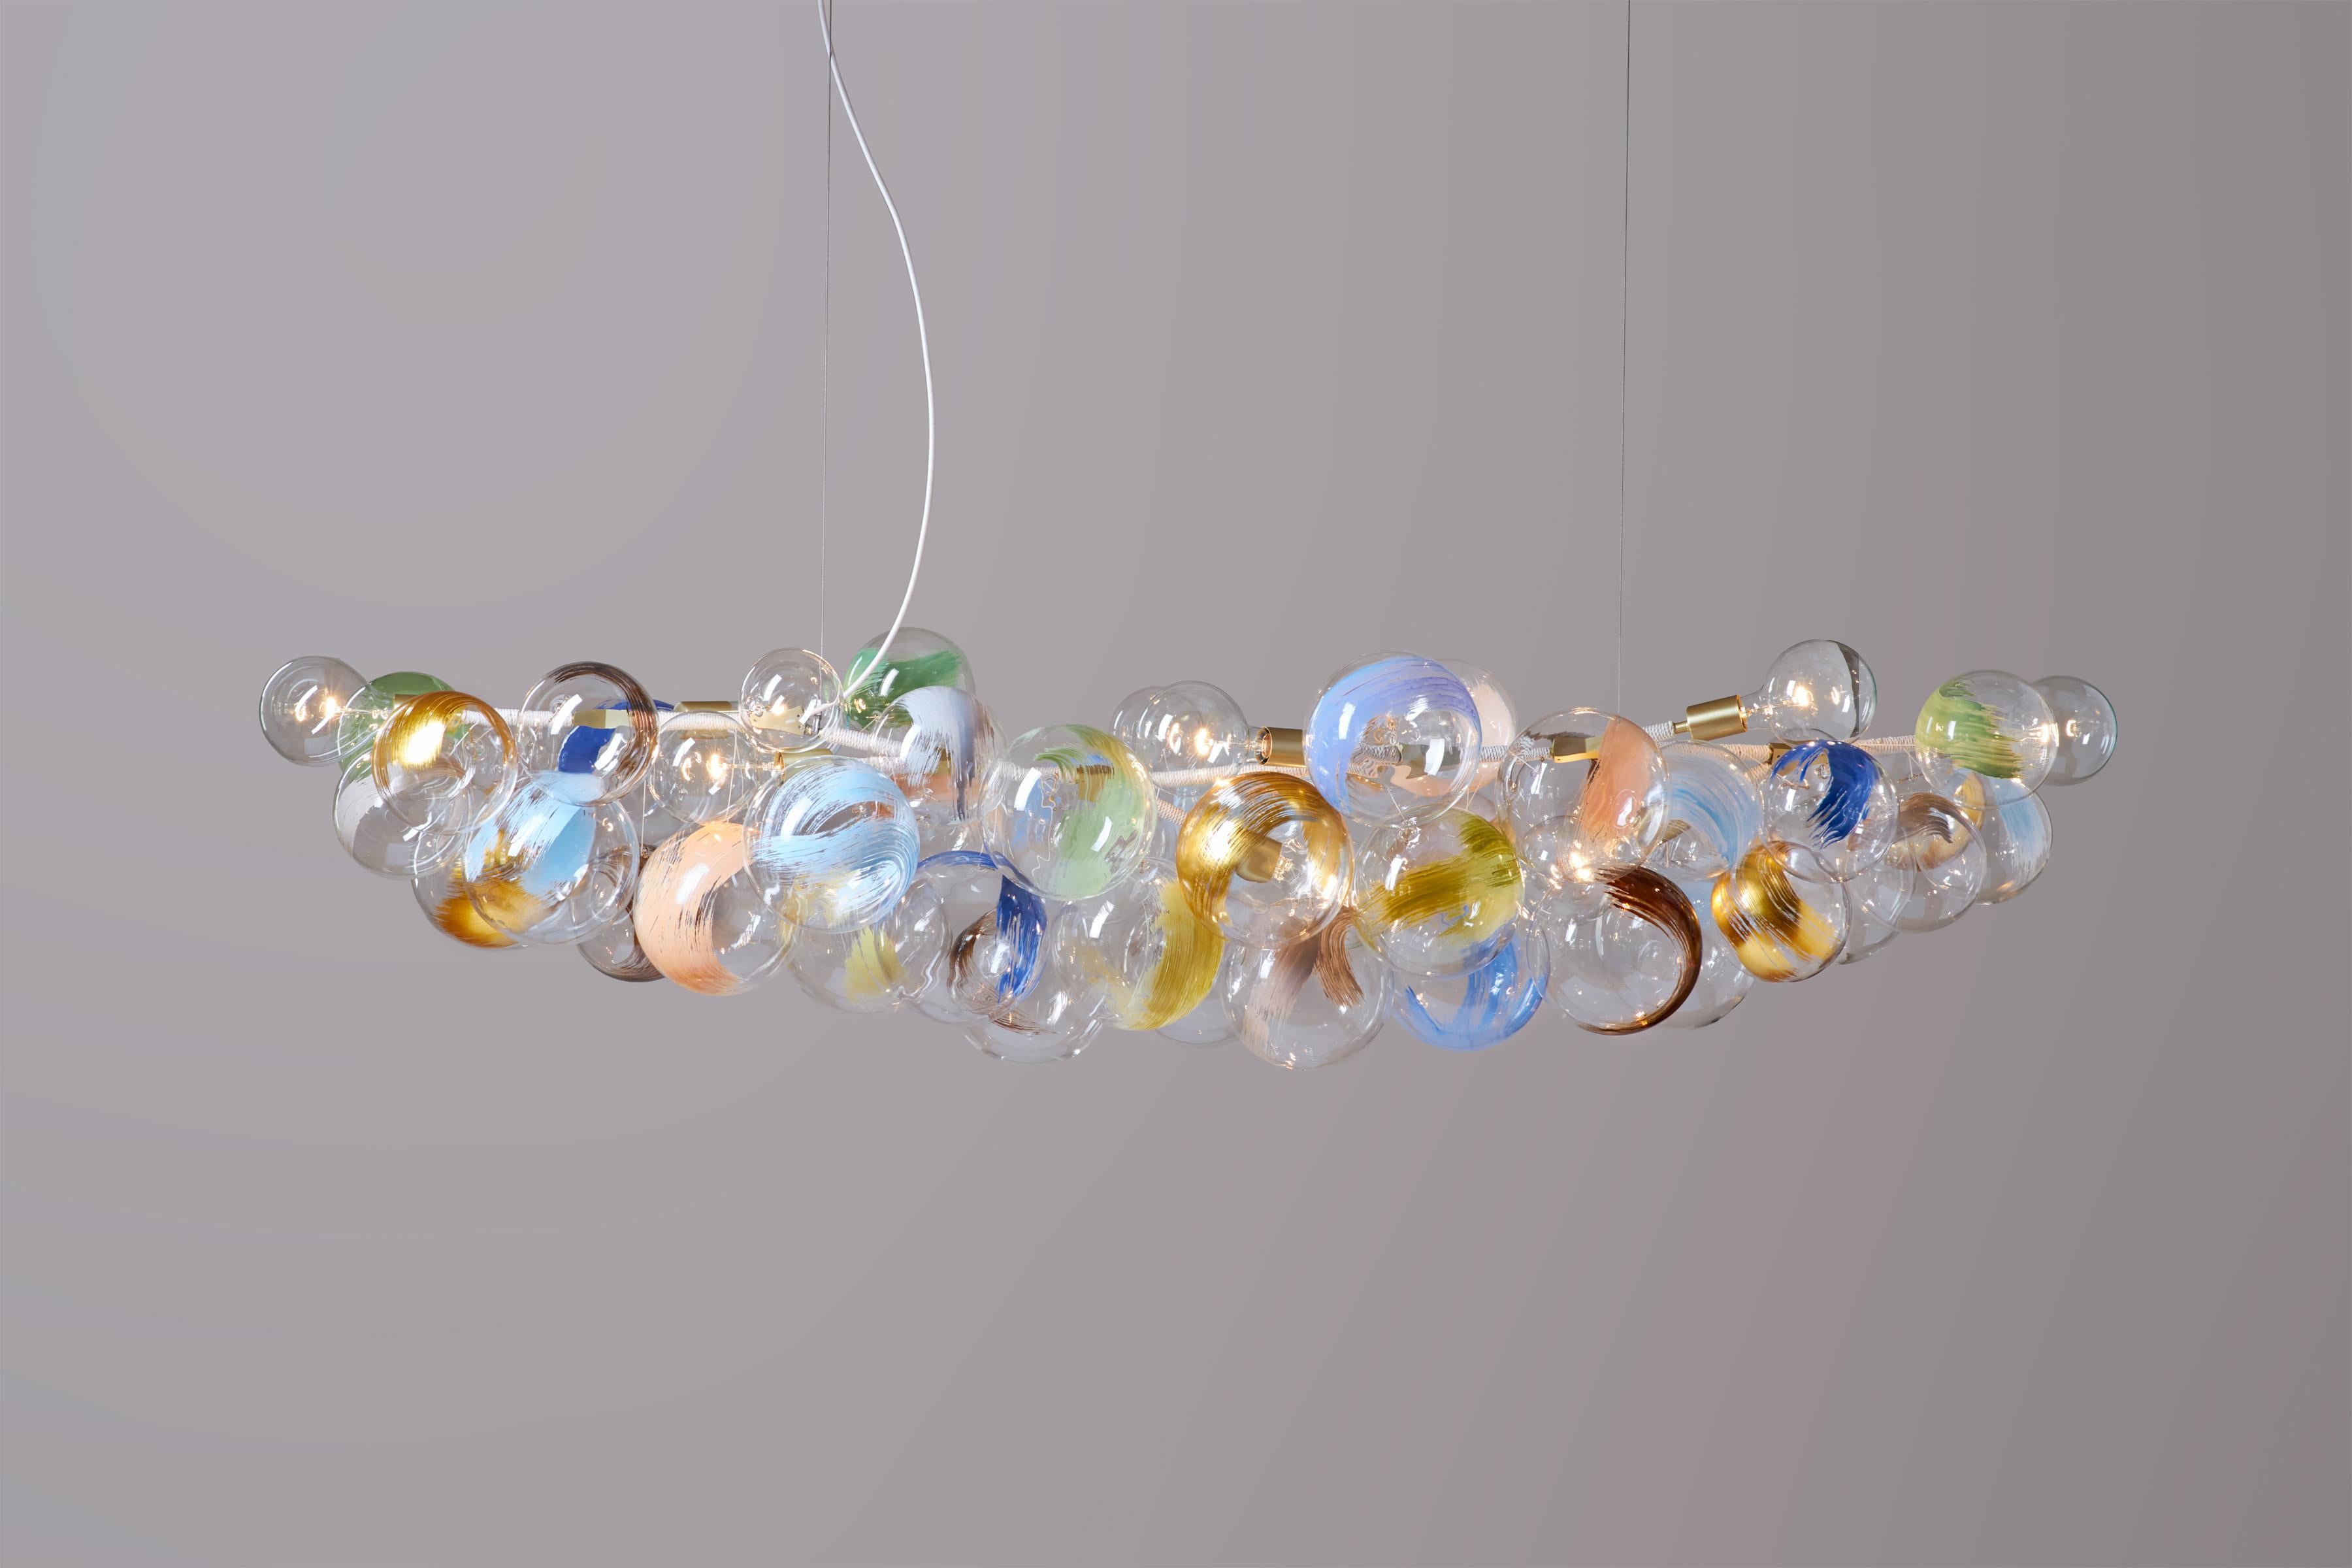 Strokes Long 80 bubble chandelier by Pelle
Dimensions: L 203 cm x H 43 cm x W 66 cm
Materials: Machined brass and aluminum, hand-blown glass globes, decorative cotton or leather coiling.
Weight: 35-40lbs/15.8-18.1kg
Metal finish options: Standard: